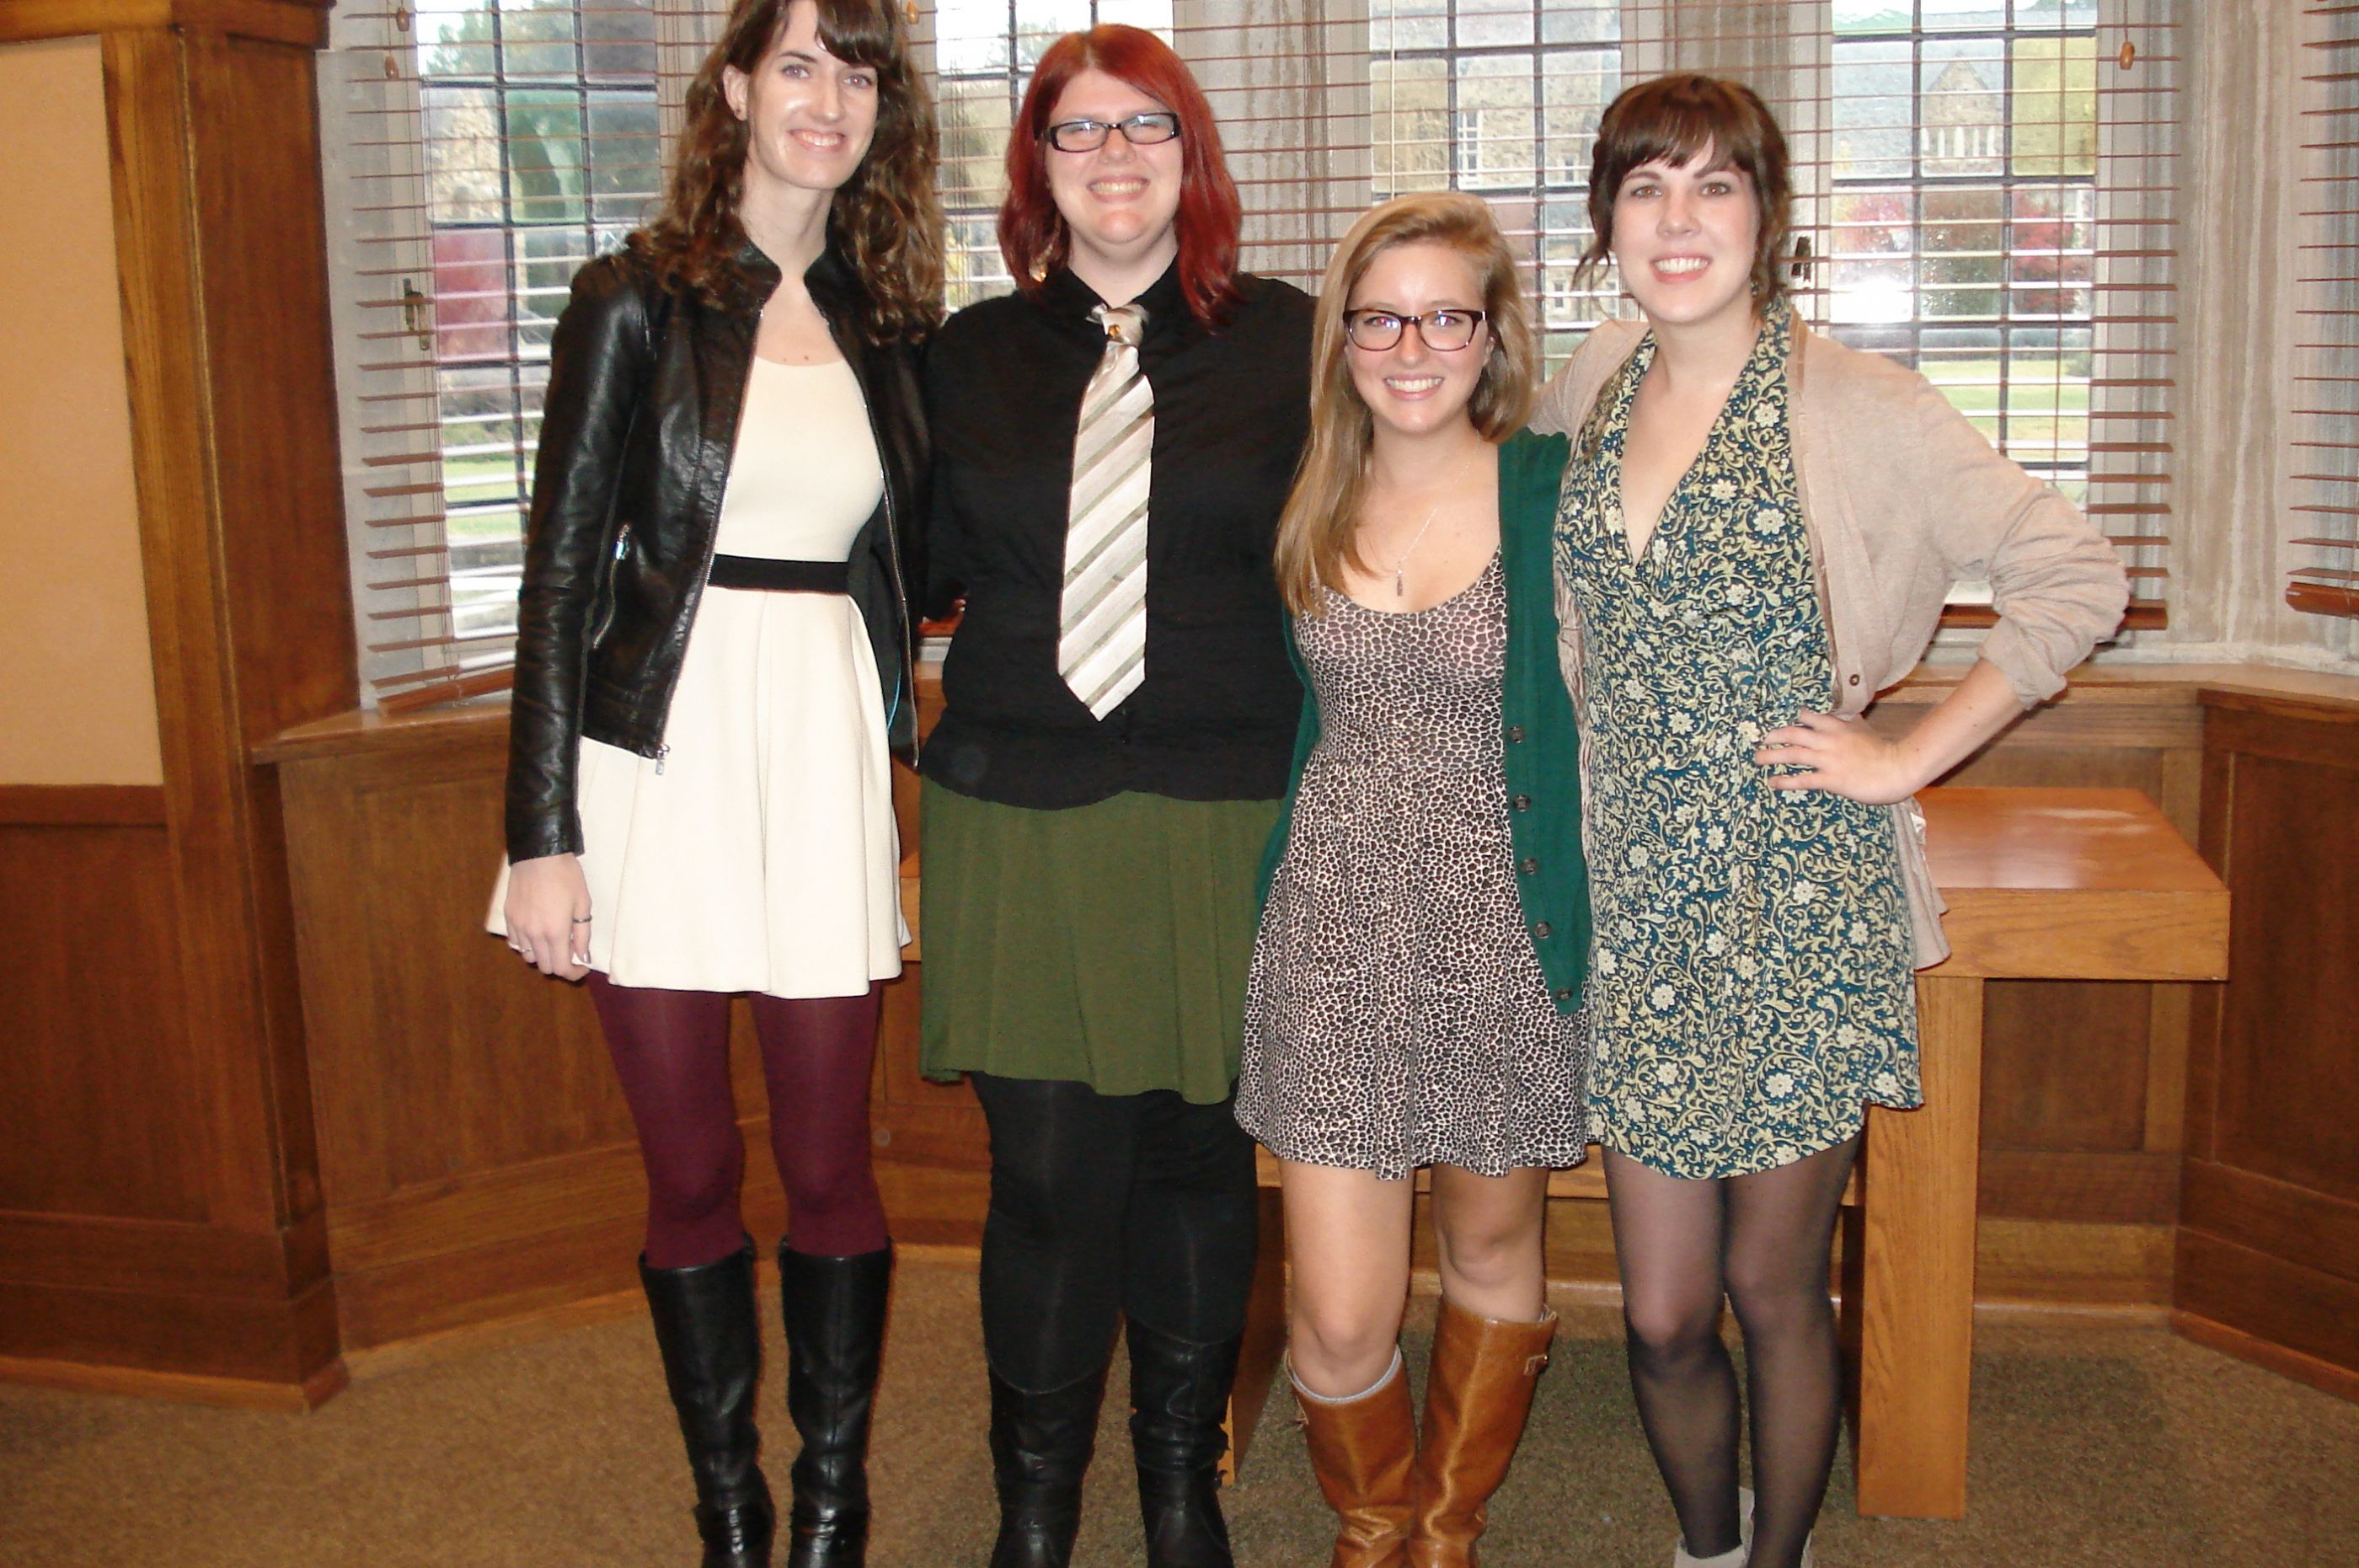 2013 induction ceremony, four female students